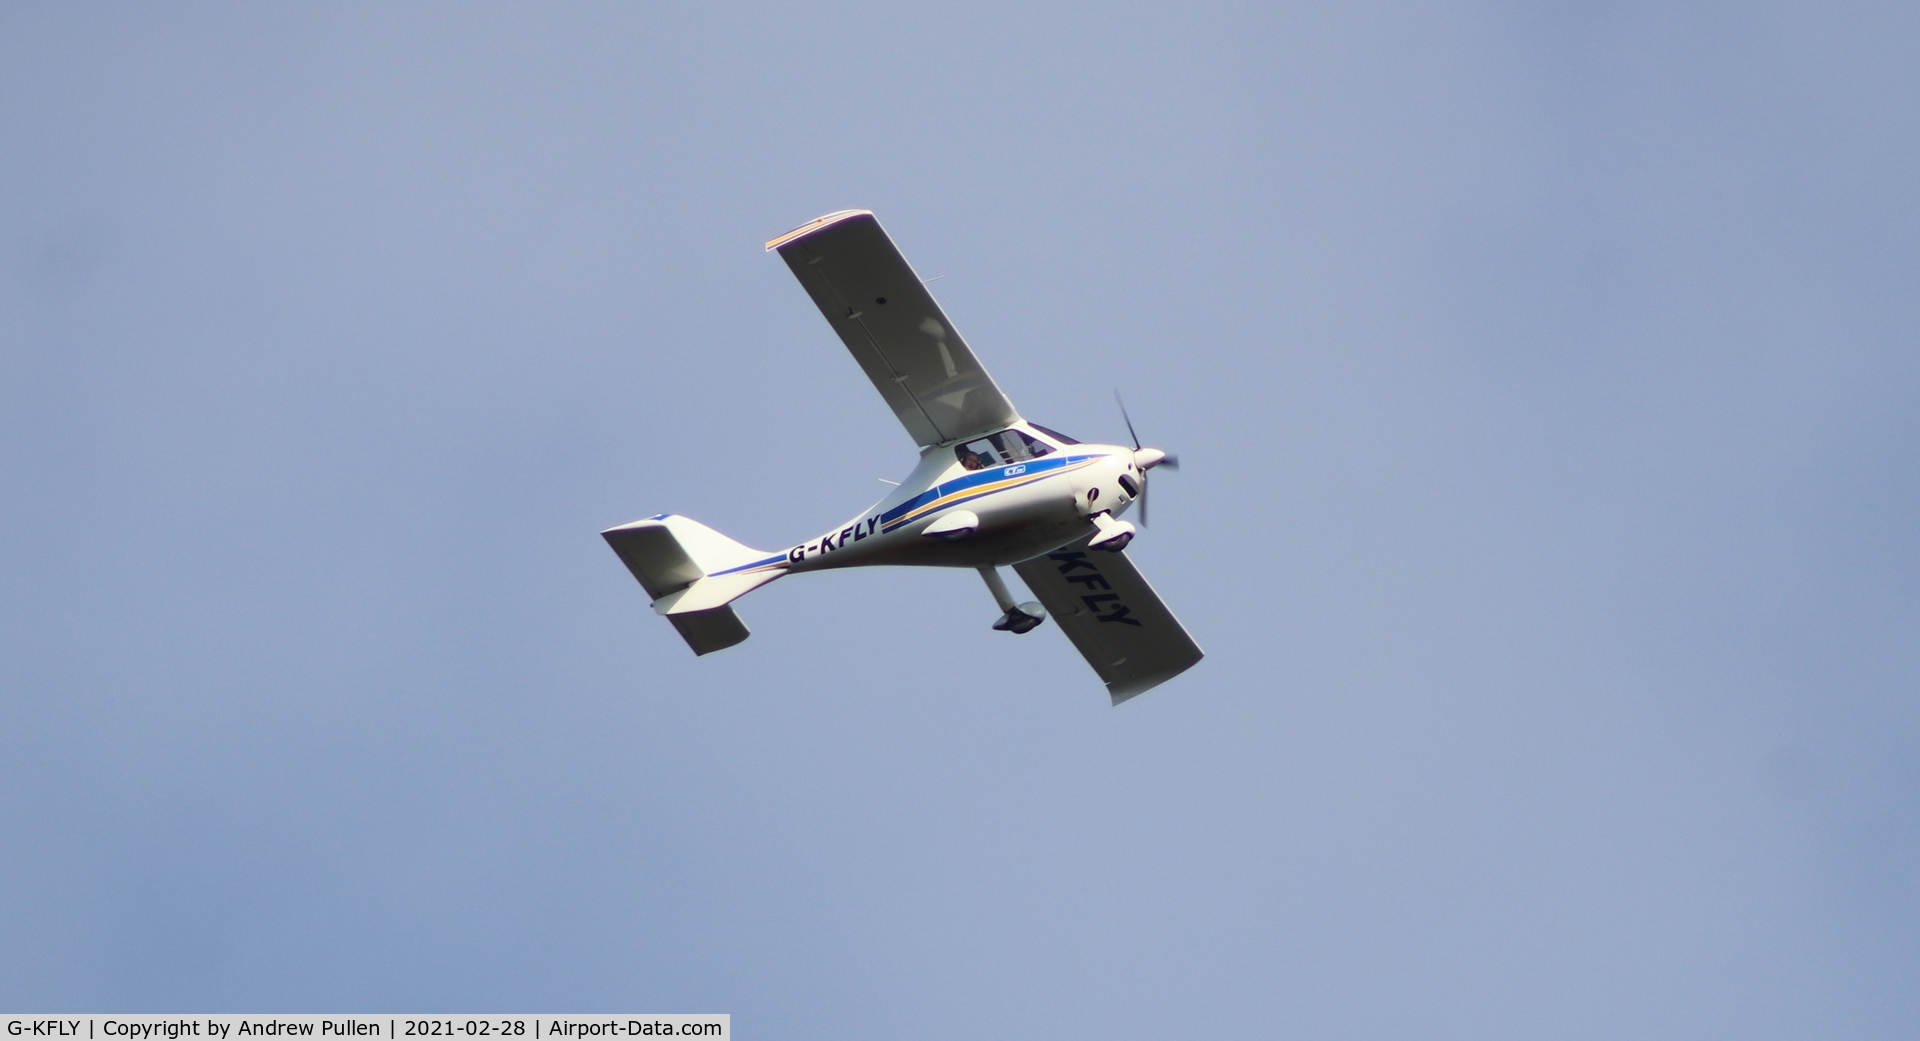 G-KFLY, 2007 Flight Design CTSW C/N 8244, Snapped this as it was flying over the river Great Ouse between Swavesey and Over in Cambridgeshire on 28th February 2021. 
I used a Canon 200D and an old pre-digital Canon EOS 75-300 zoom lens.